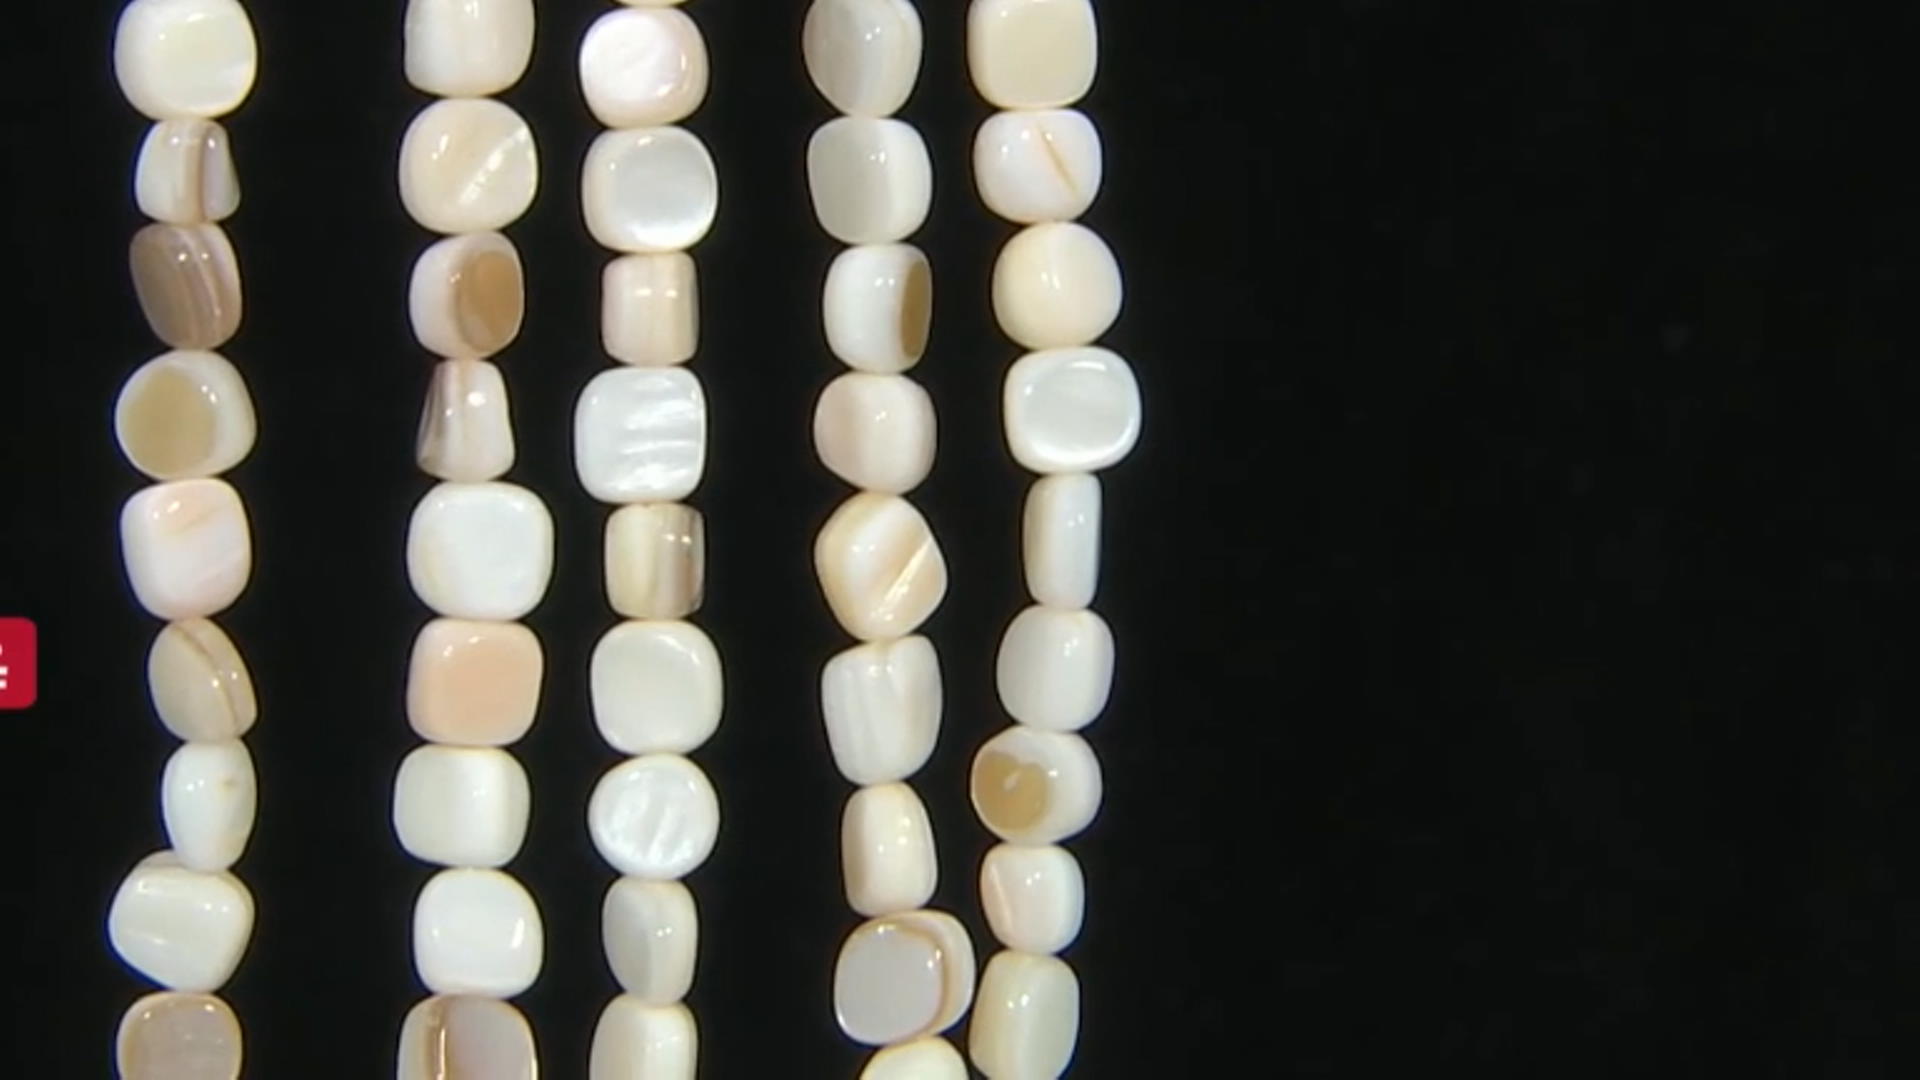 White Mother of Pearl Square Pebble appx 6.5-7.5mm Shape Bead Strand Set of 5 appx 14-15" Video Thumbnail